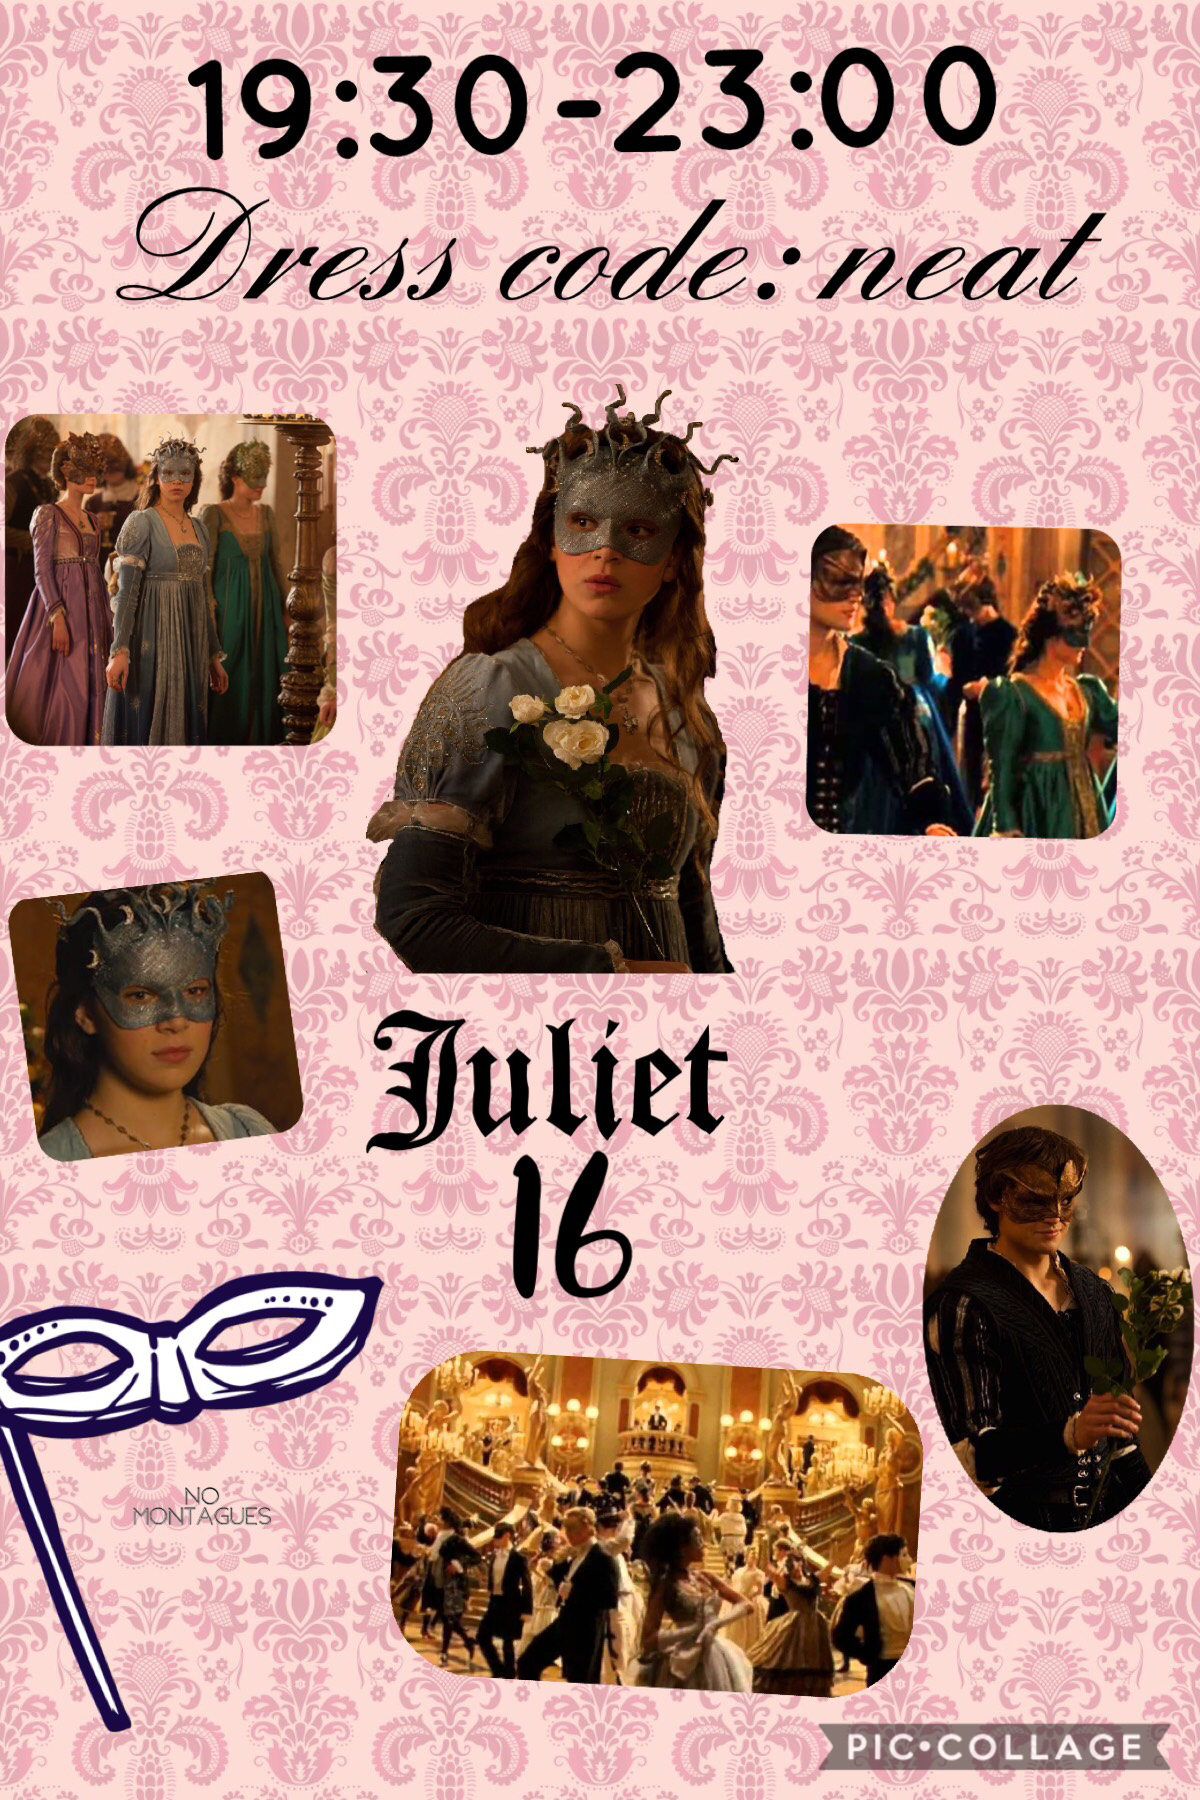 Invitation for the masquerade ball of Romeo and Juliet